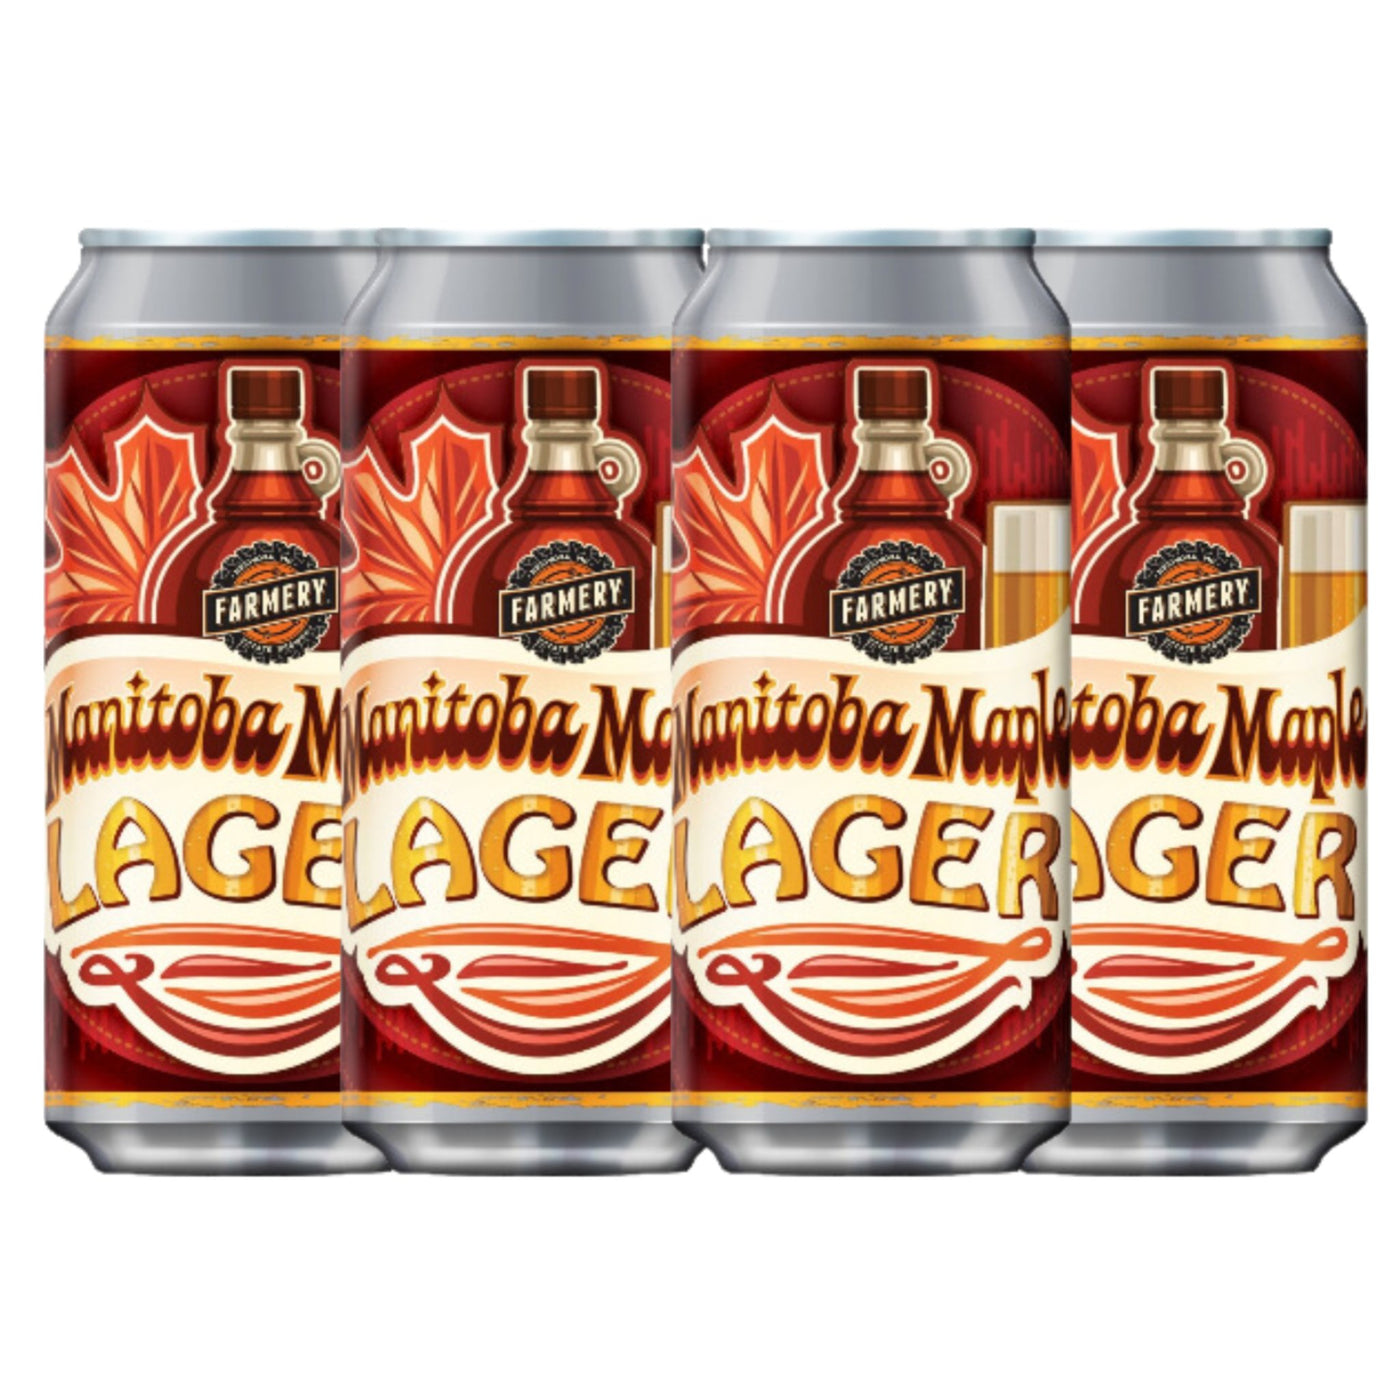 Manitoba Maple Lager - Farmery Estate Brewing Company Inc.-Beer